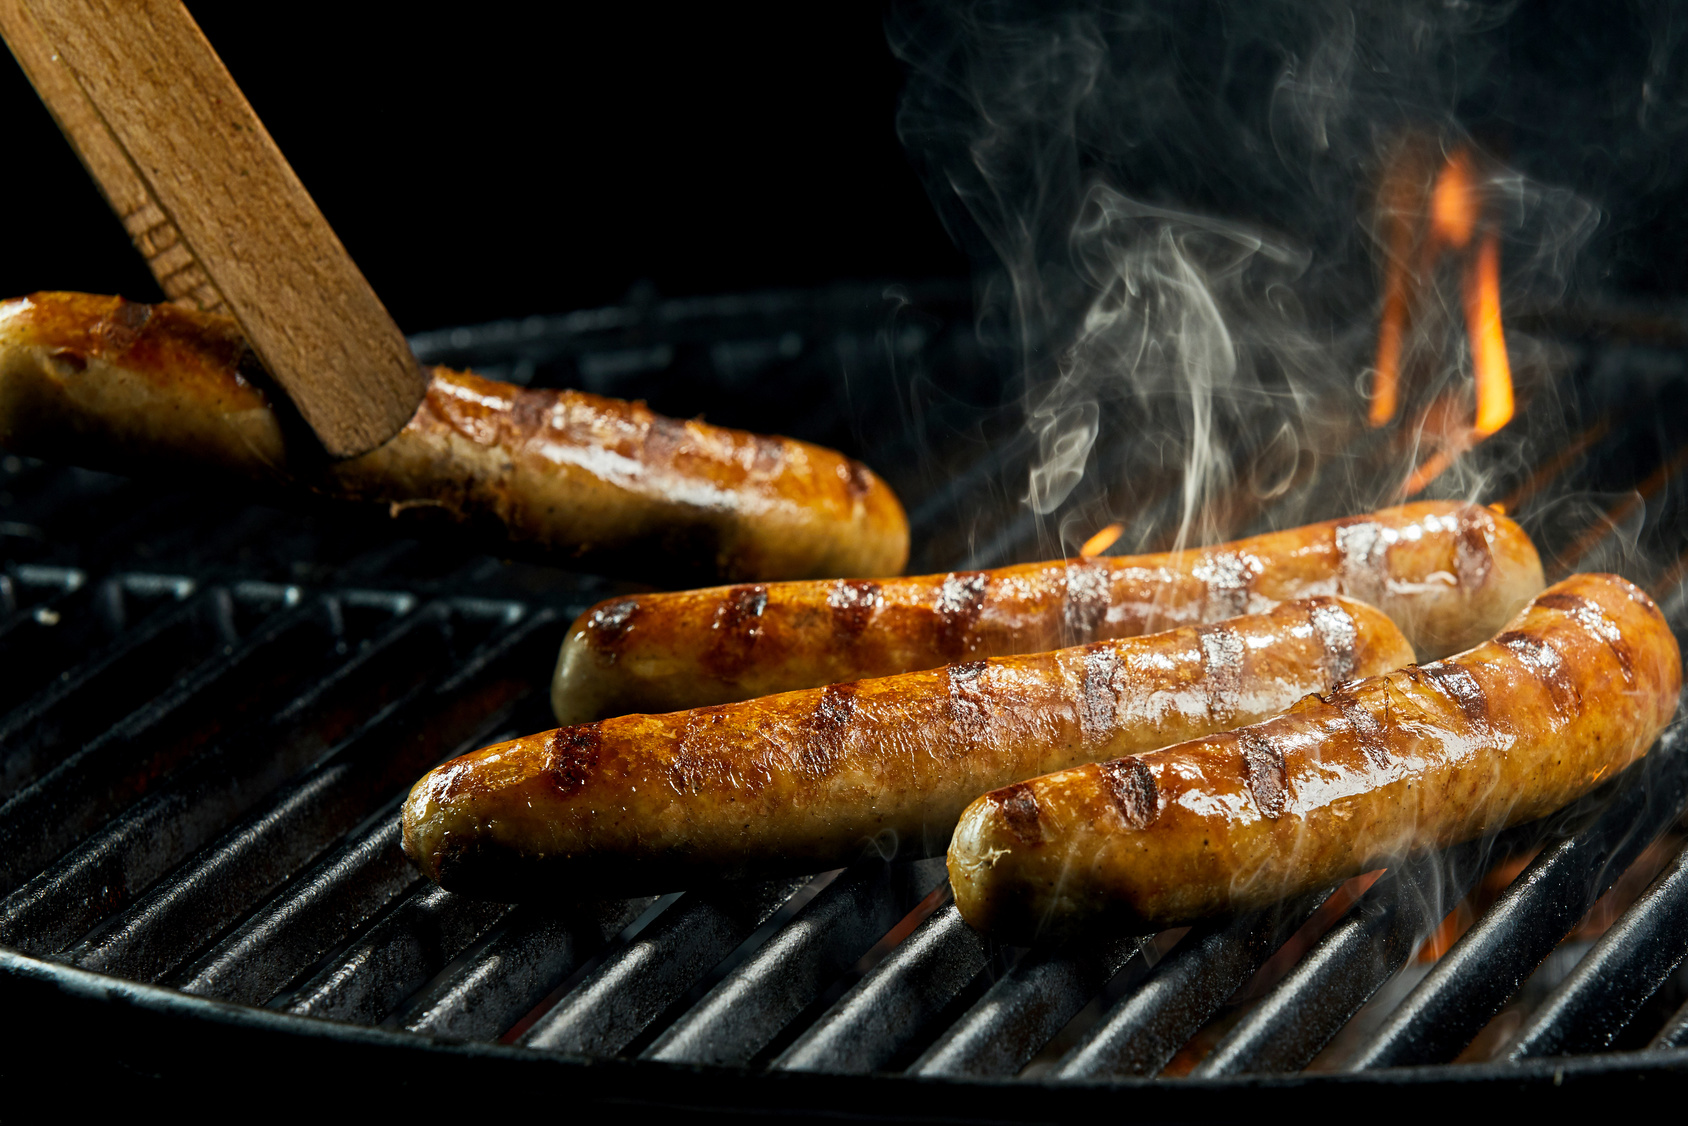 Succulent sausages grilling on a BBQ fire with flames and smoke or steam and wooden tongs turning one over